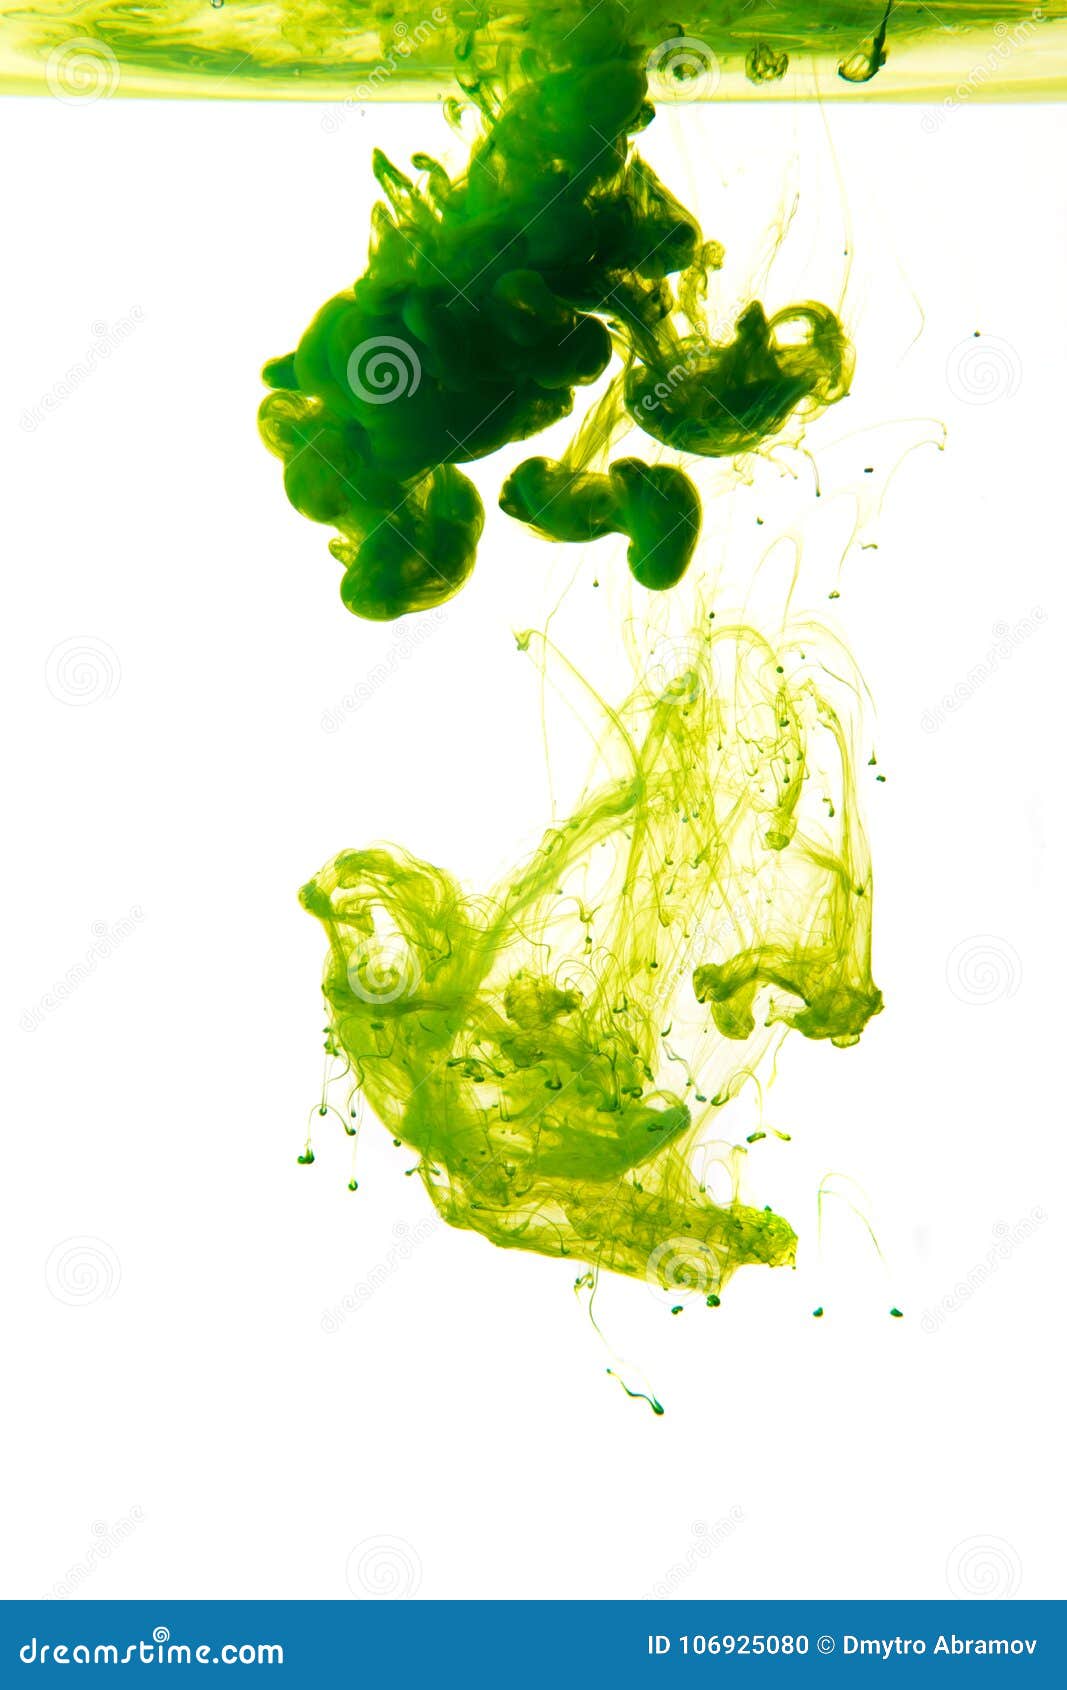 Inks in Water, Color Abstraction, Color Explosion Stock Photo - Image ...